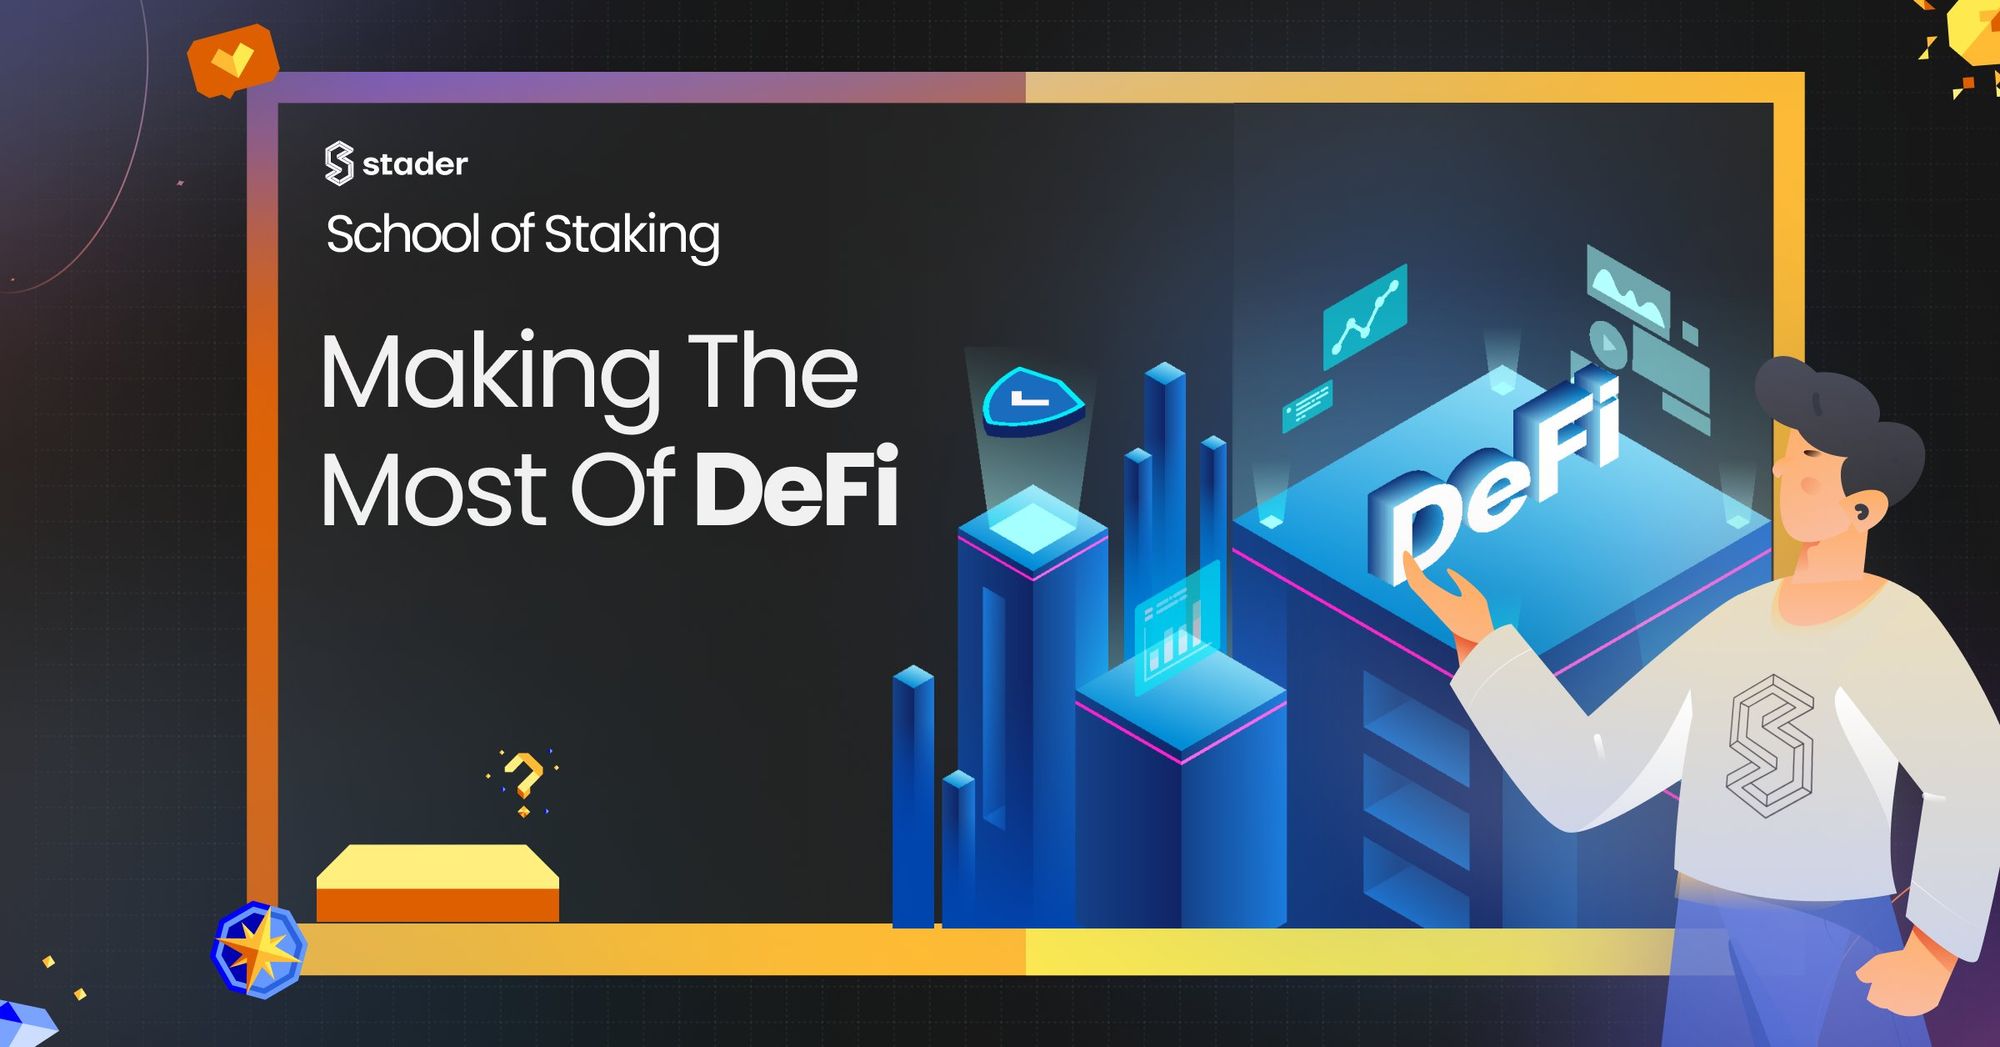 Making The Most Of DeFi